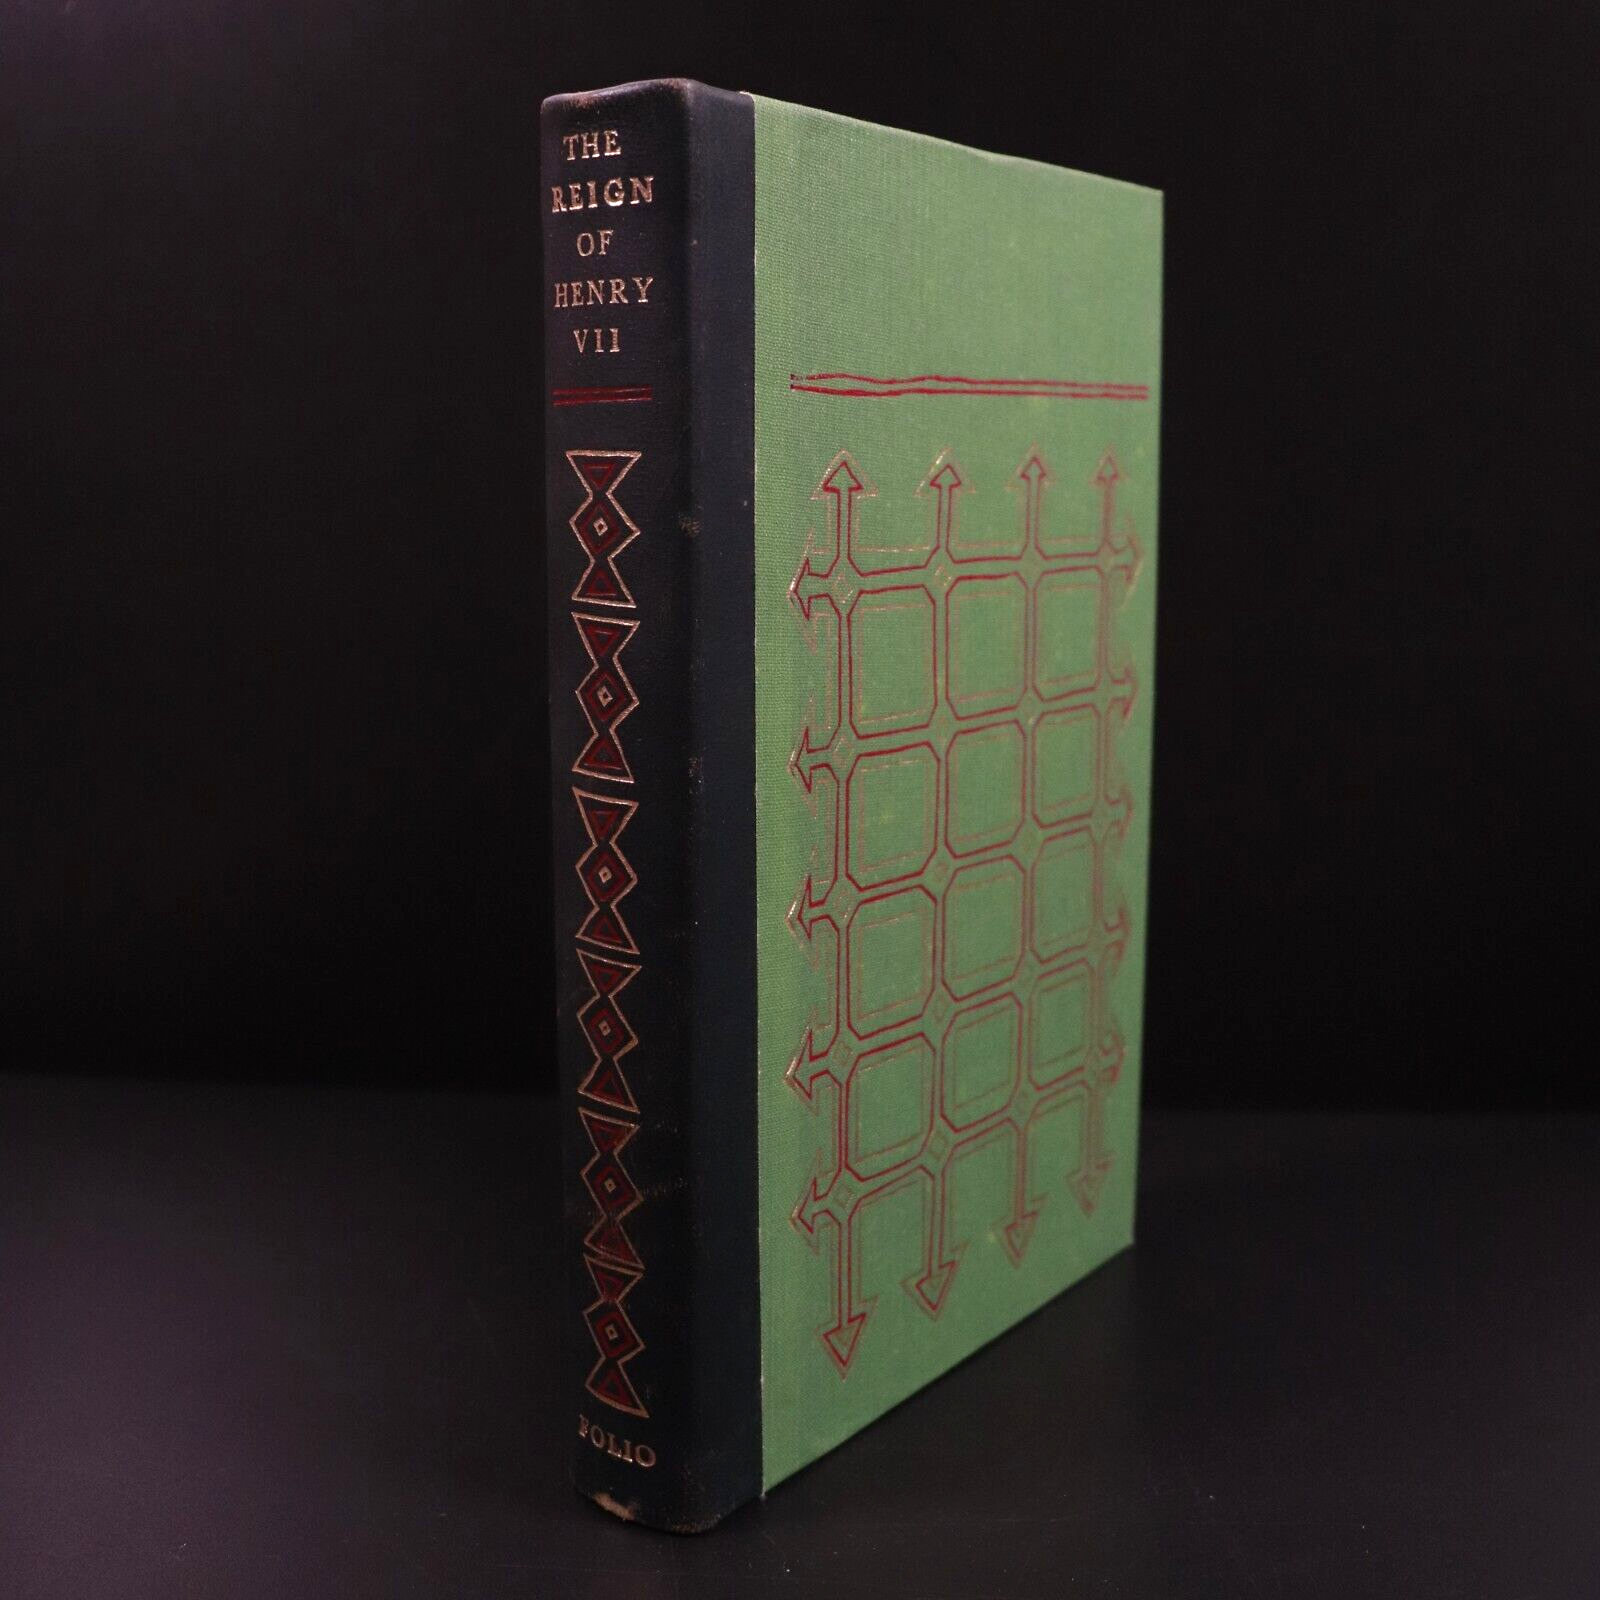 1971 History Of The Reign Of King Henry VII - Folio Society British History Book